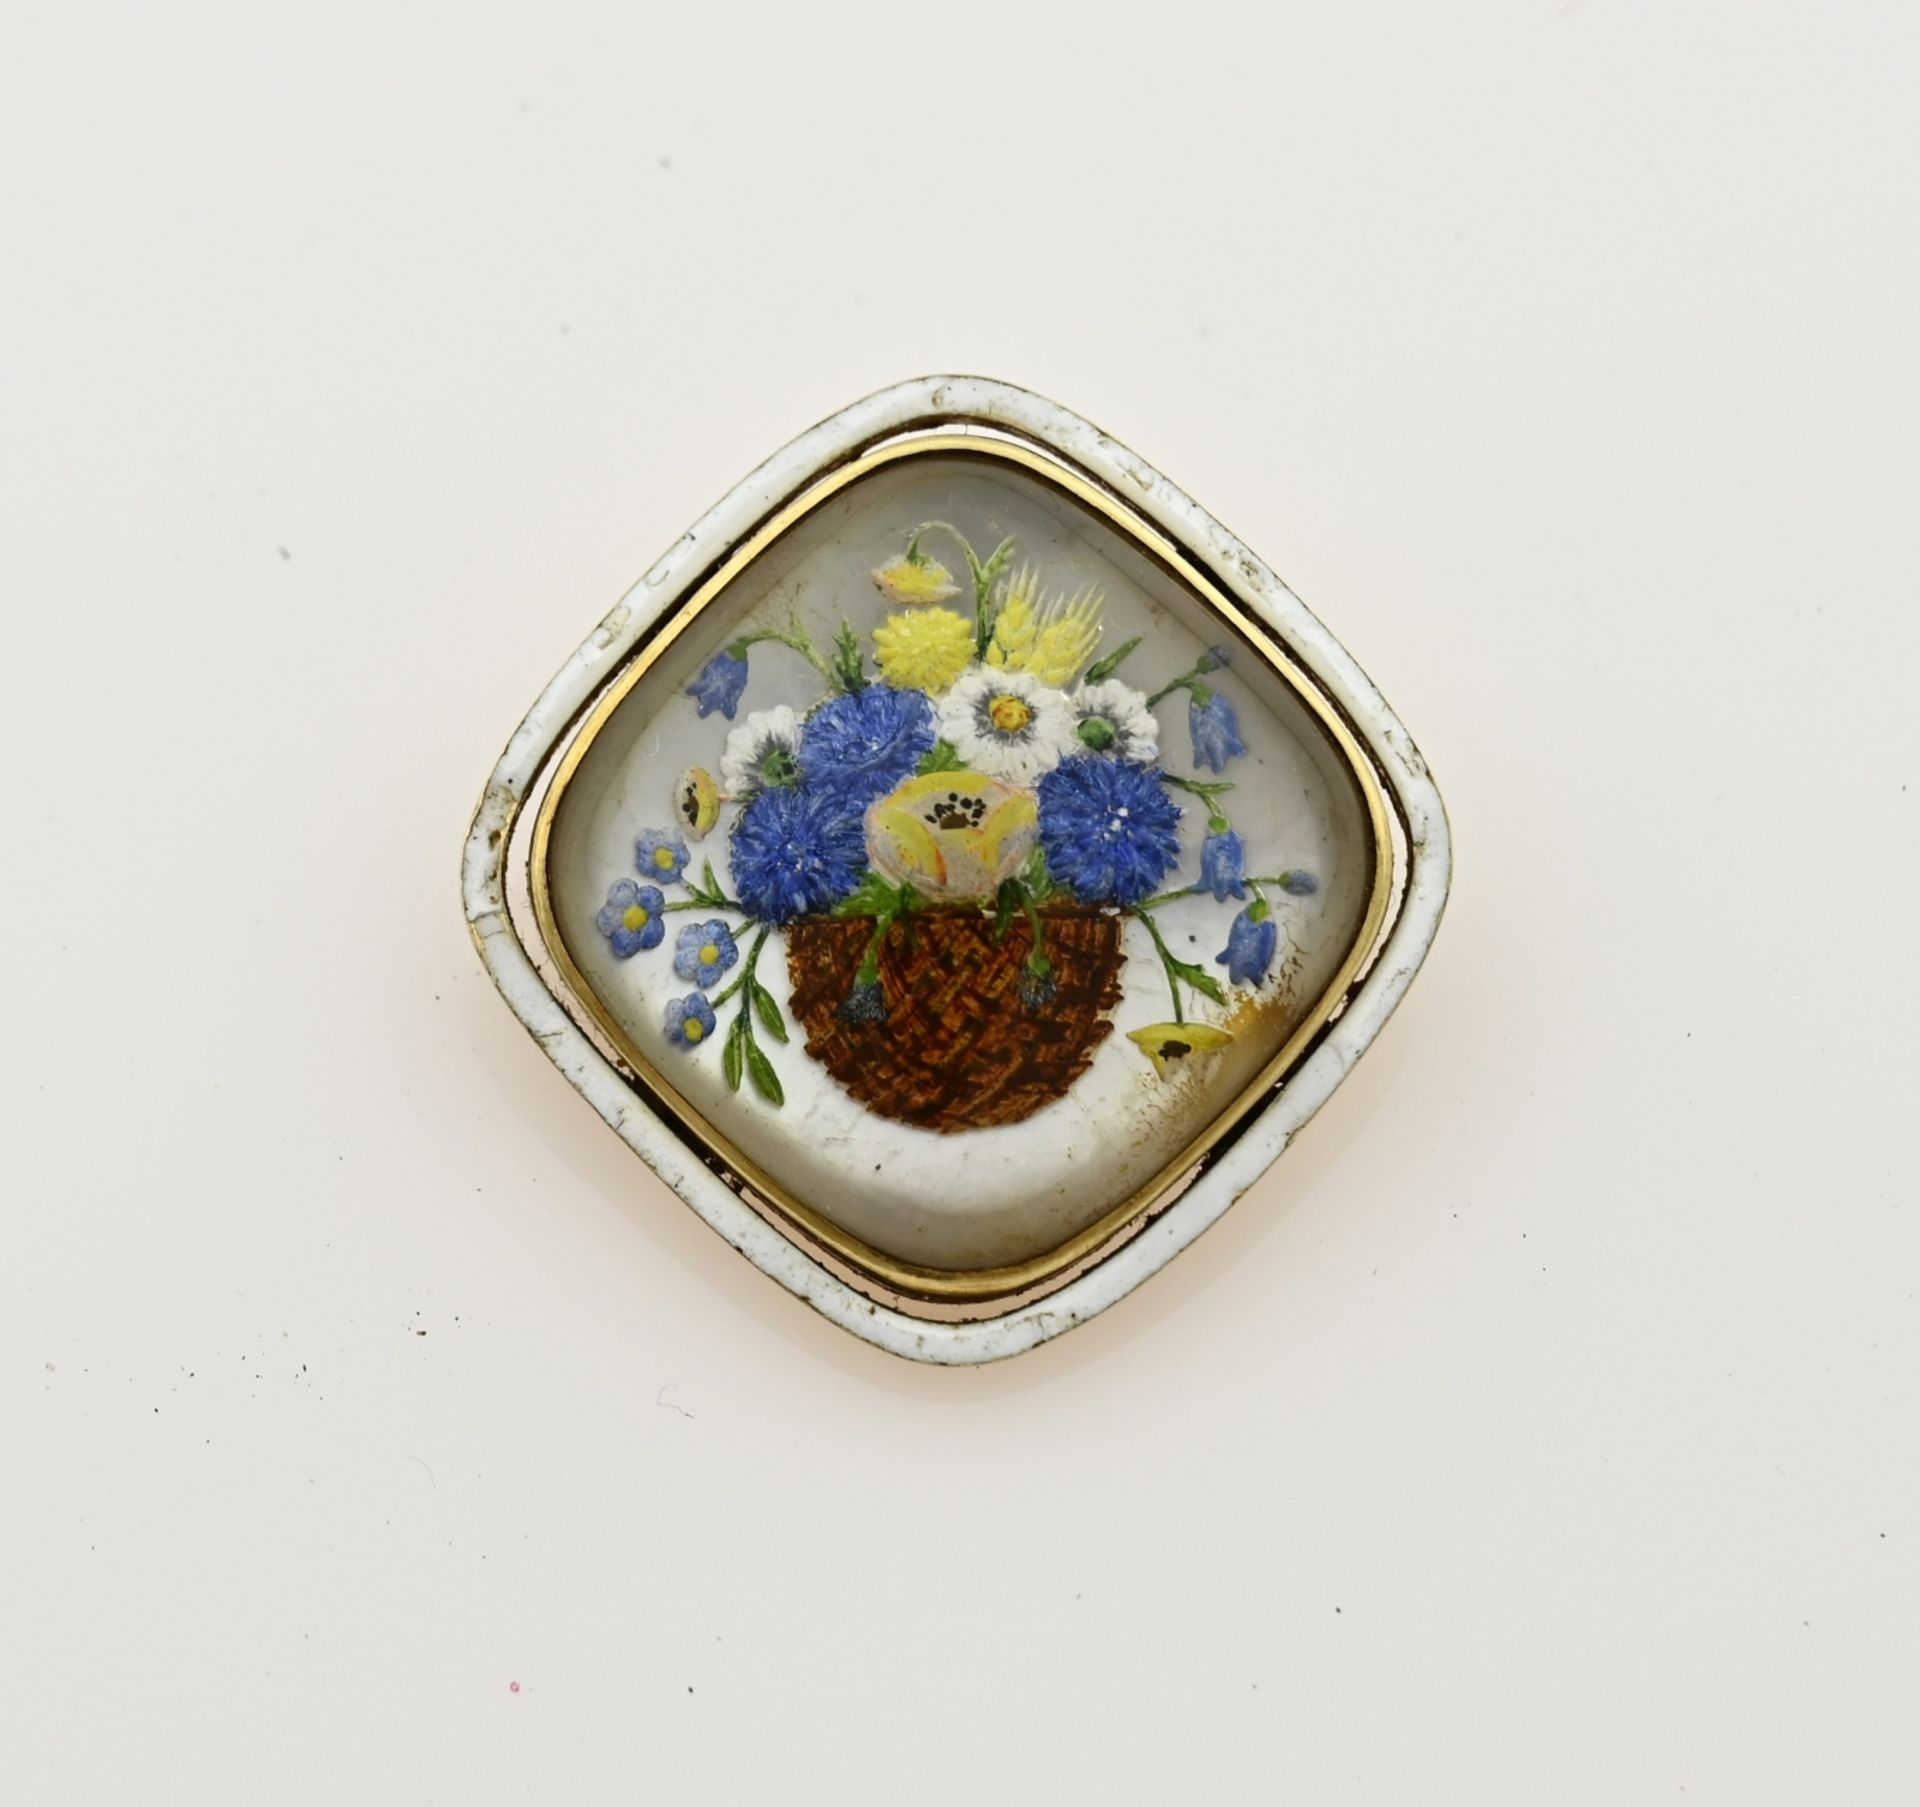 Gold brooch with flowers